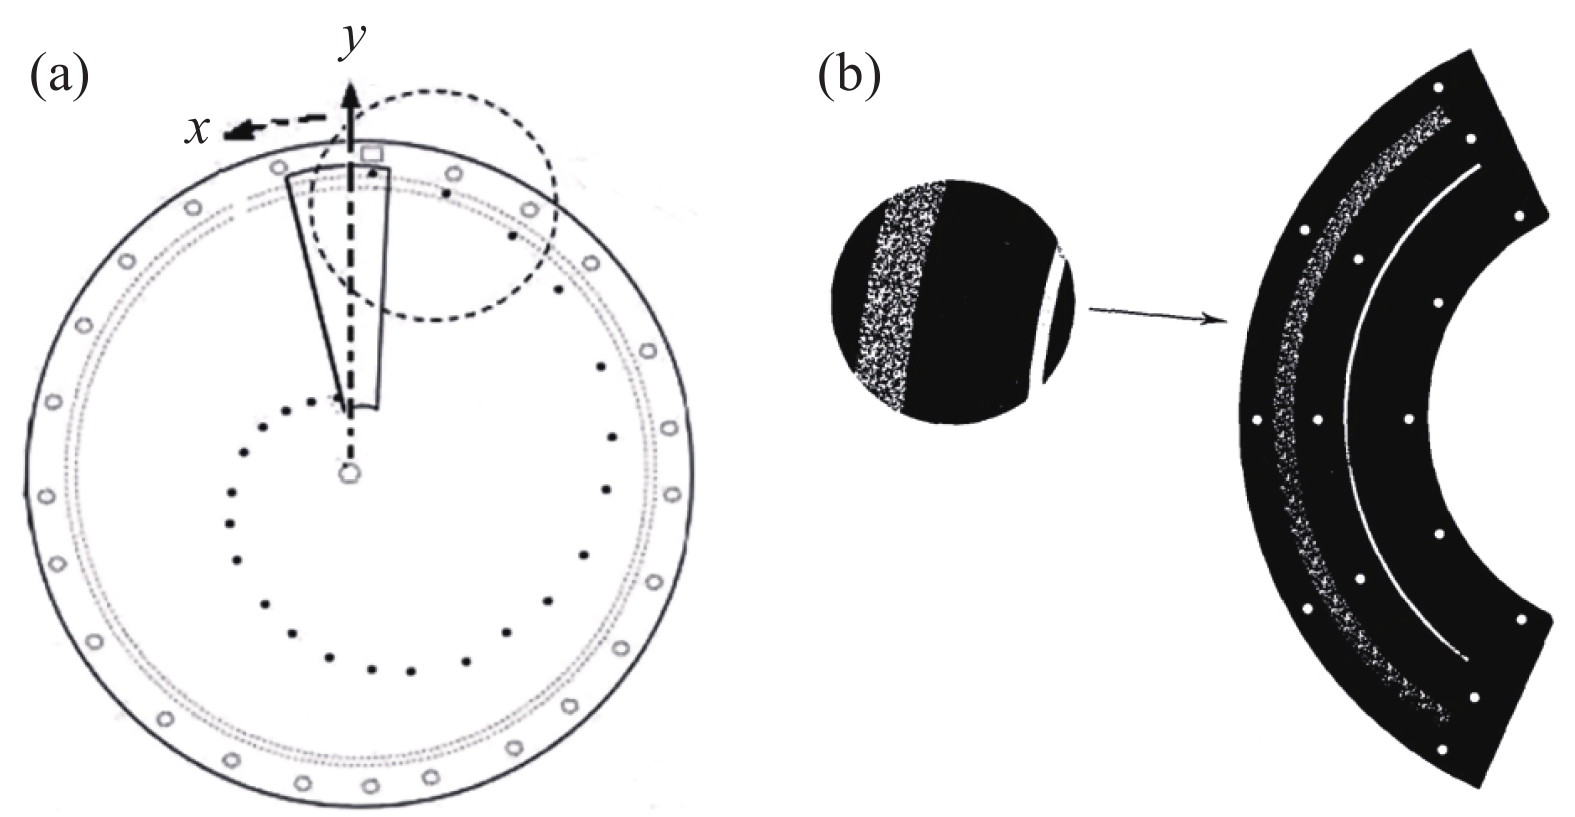 (a) Schematic diagram of the Nipkow disk[47]; (b) Schematic diagram of the mask used in spectroscopic cameras in the 1970s[61]